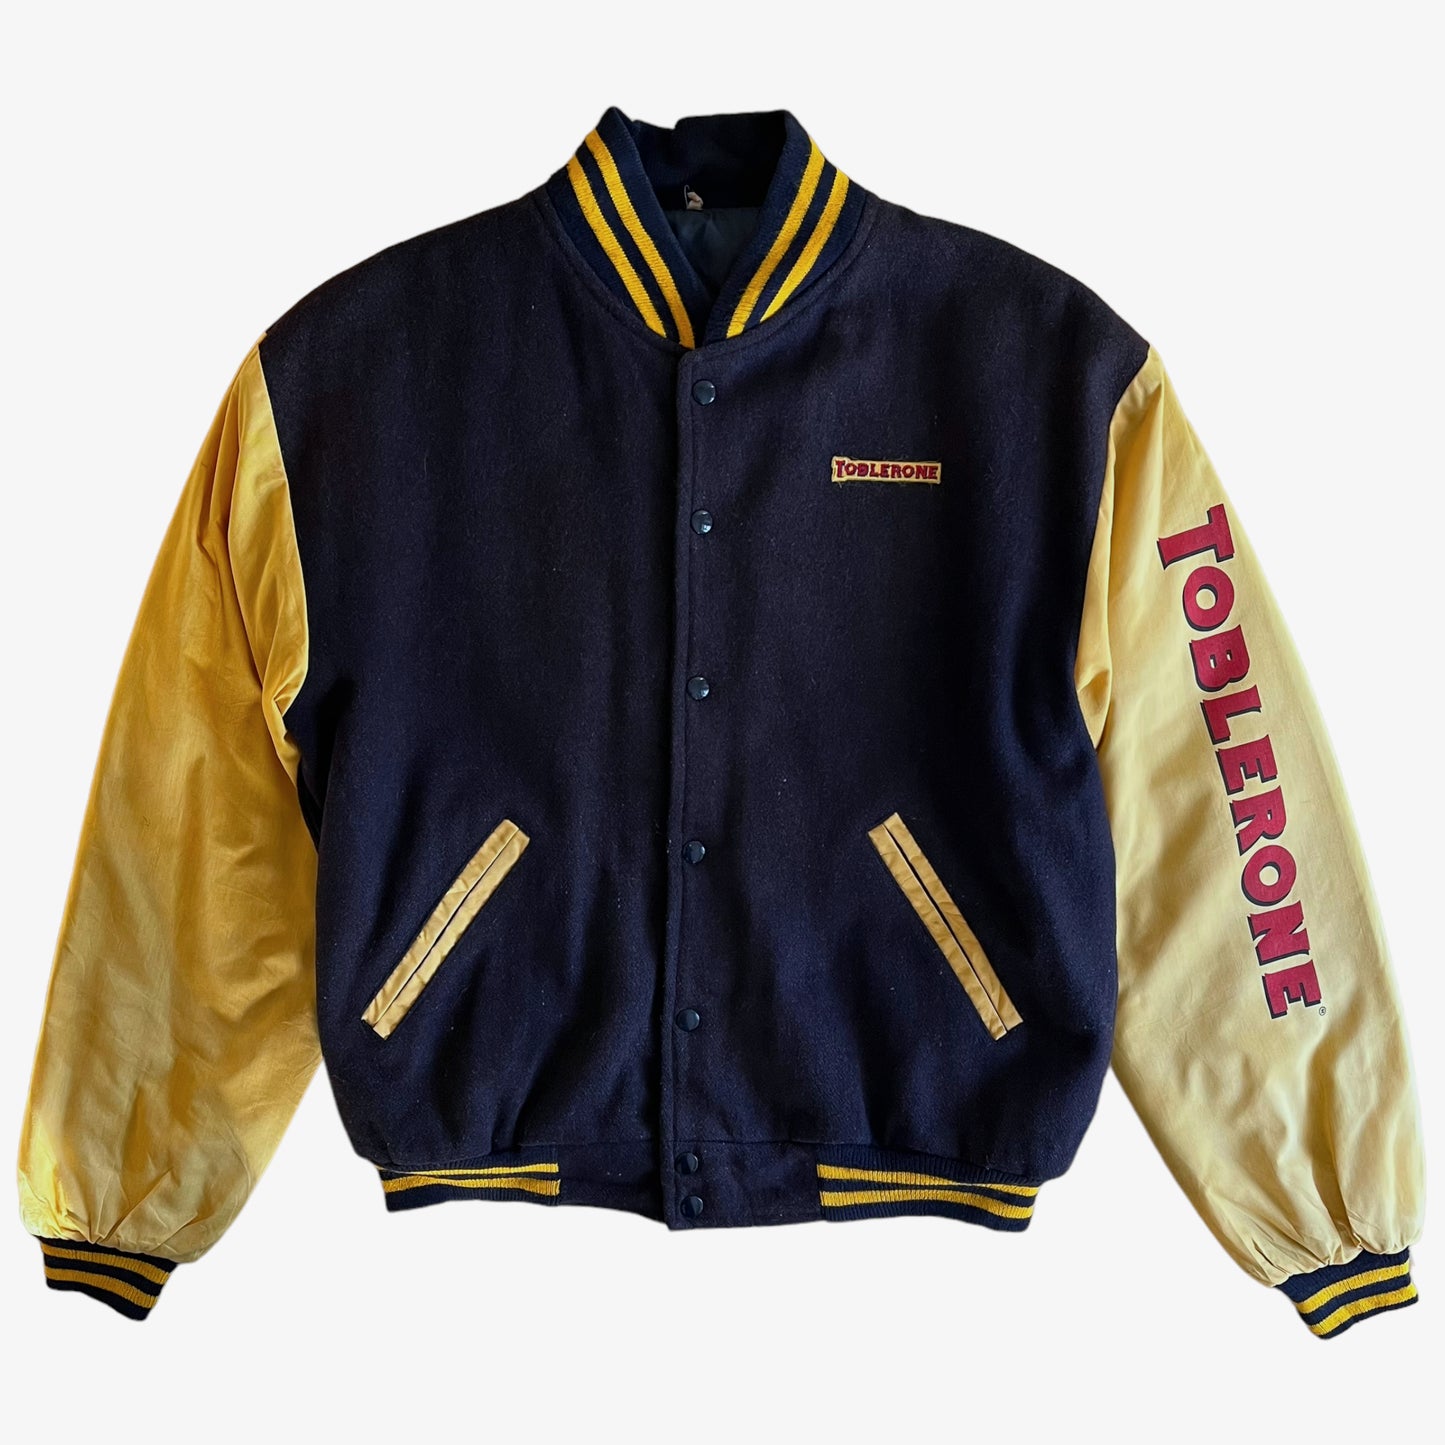 Vintage 90s Toblerone Varsity Jacket With Sleeve Spell Out - Casspios Dream